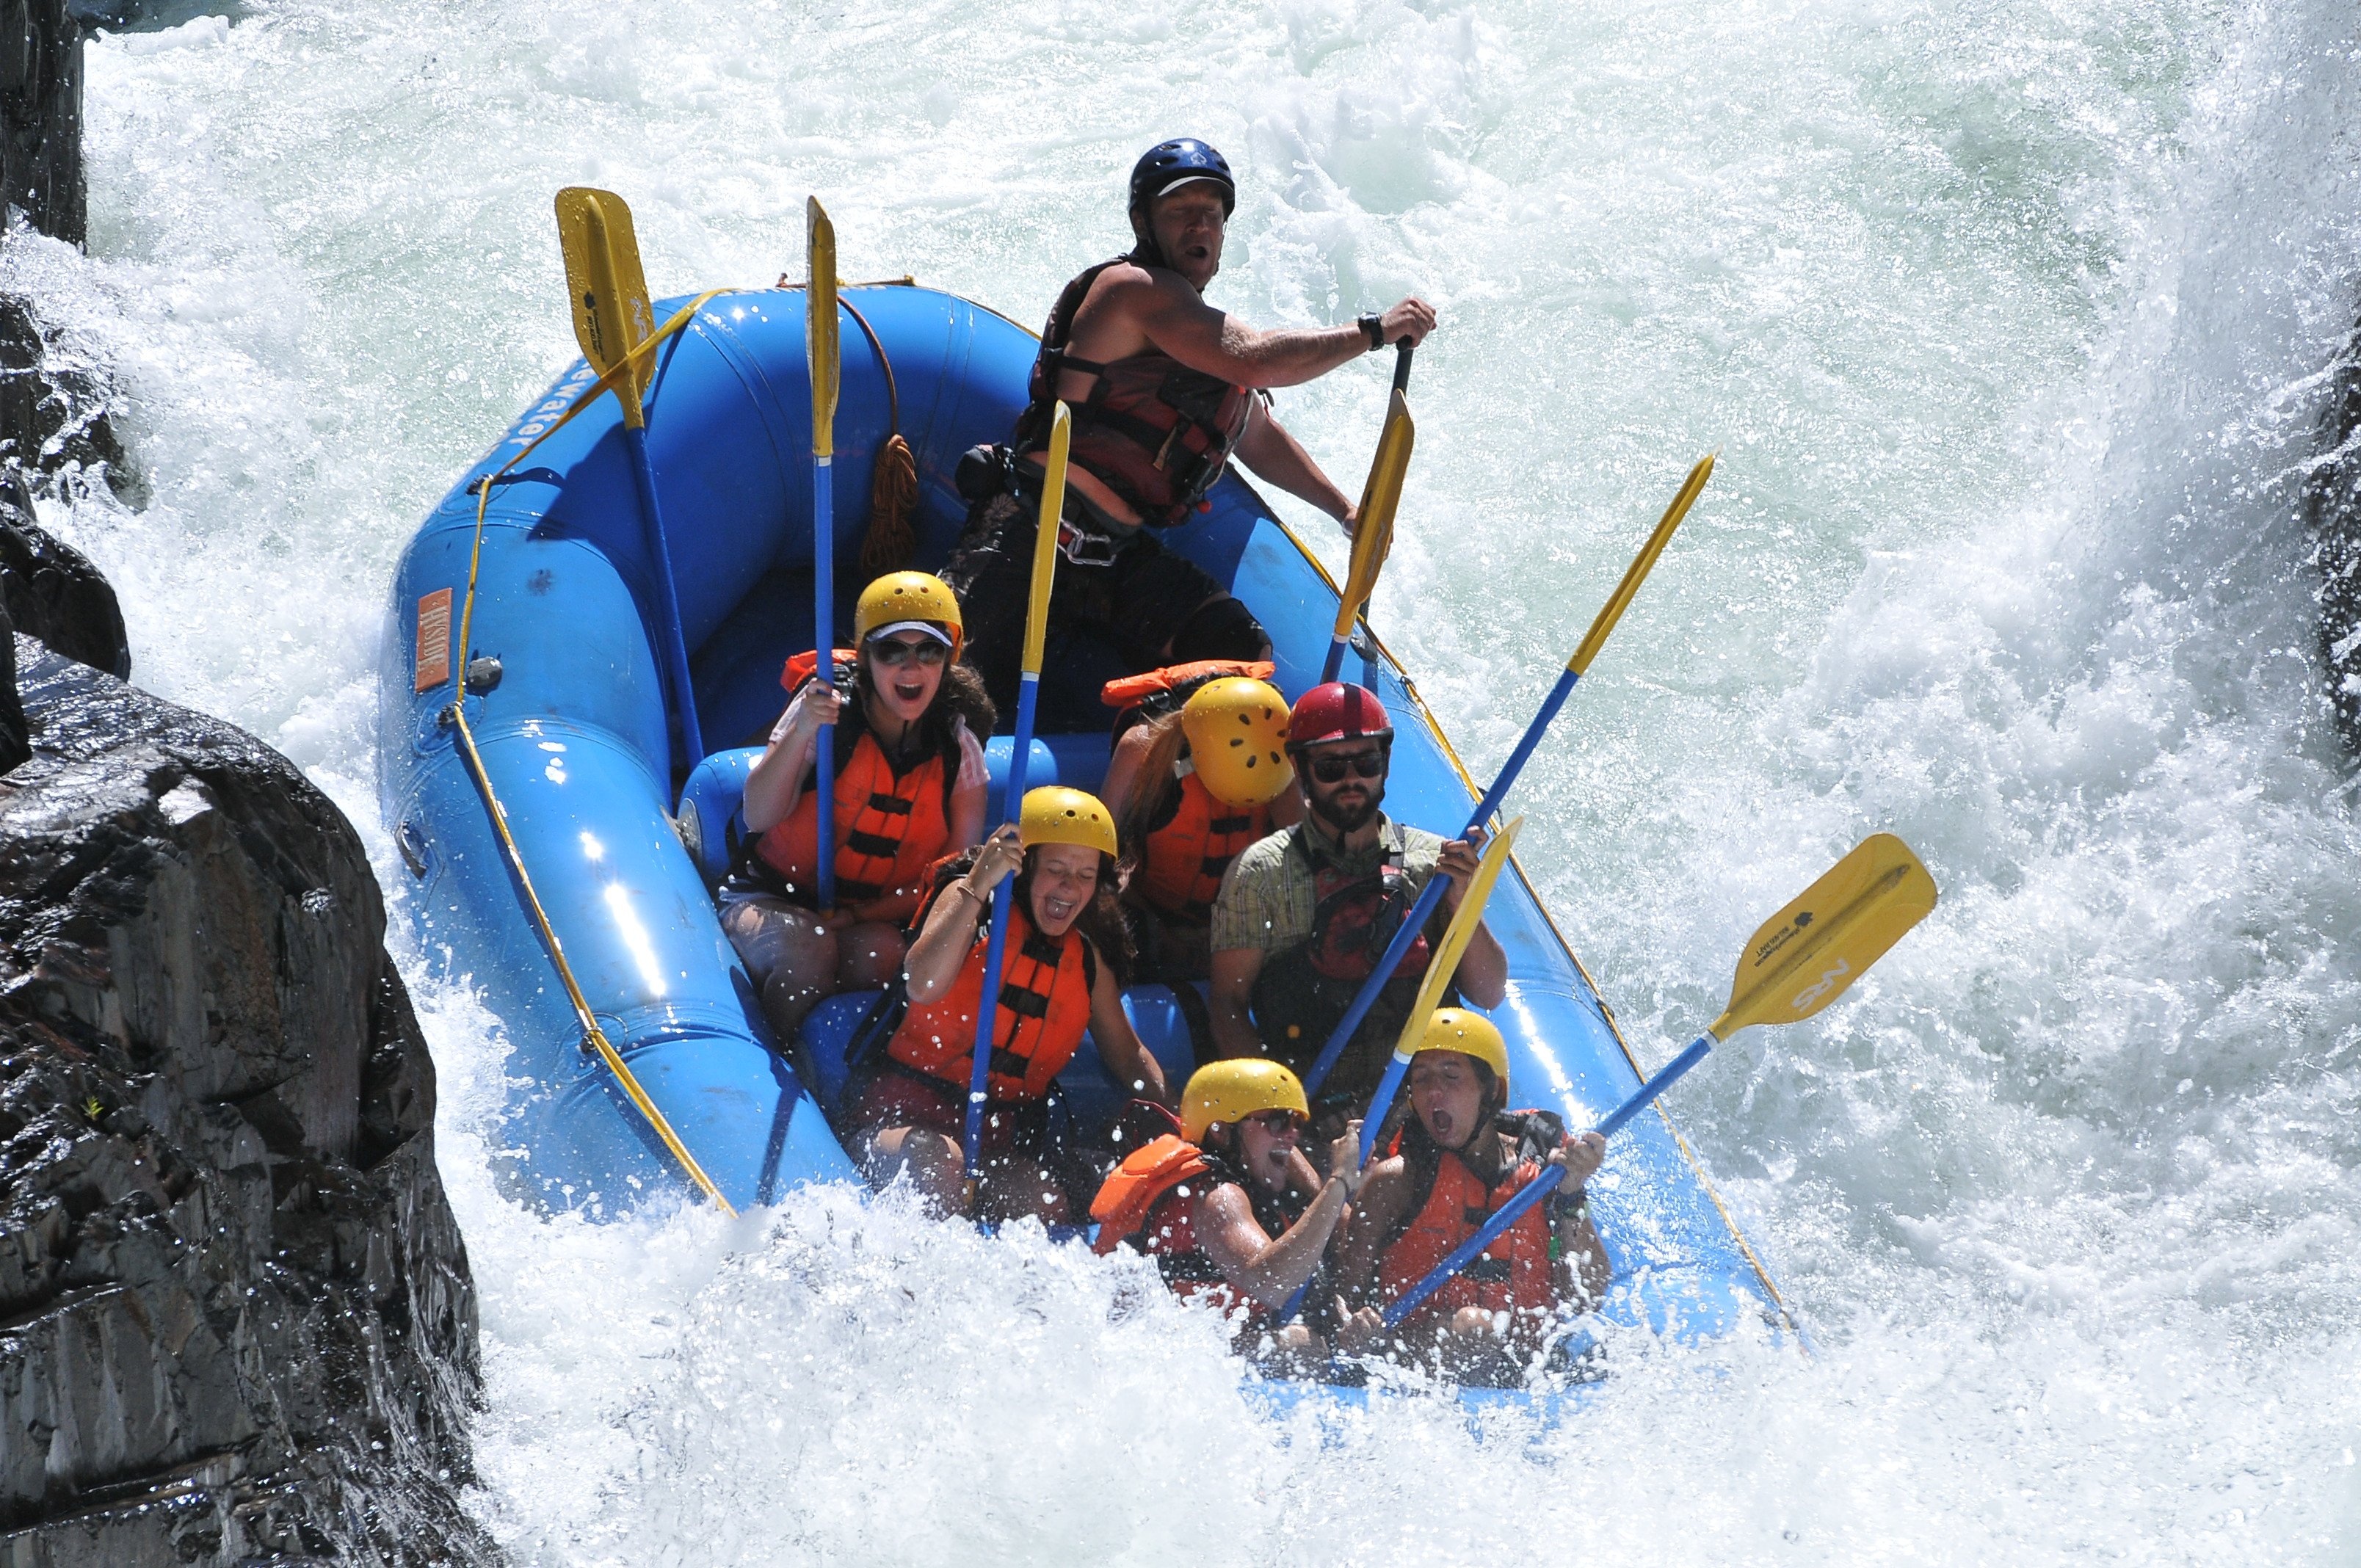 Rafting: A group whitewater boating activity performed by adrenaline lovers. 3220x2140 HD Wallpaper.